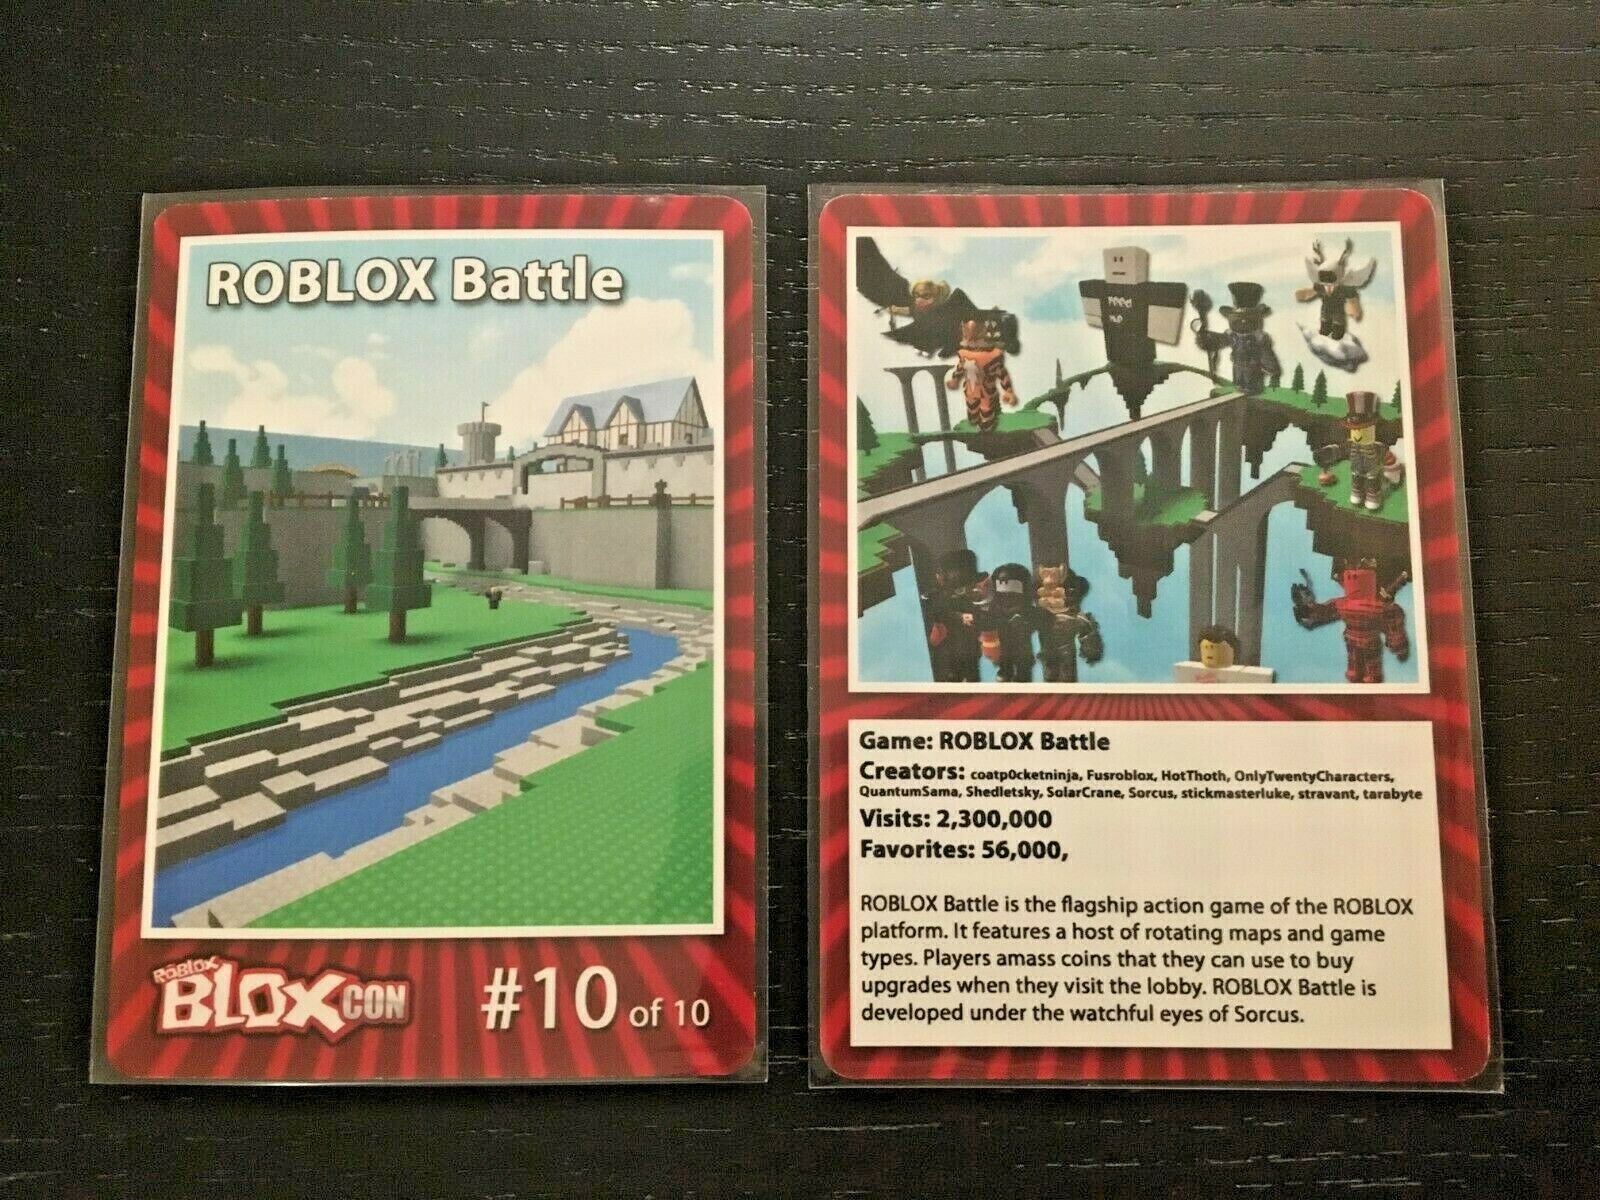 Bxfn488htjuy7m - roblox 10 game card